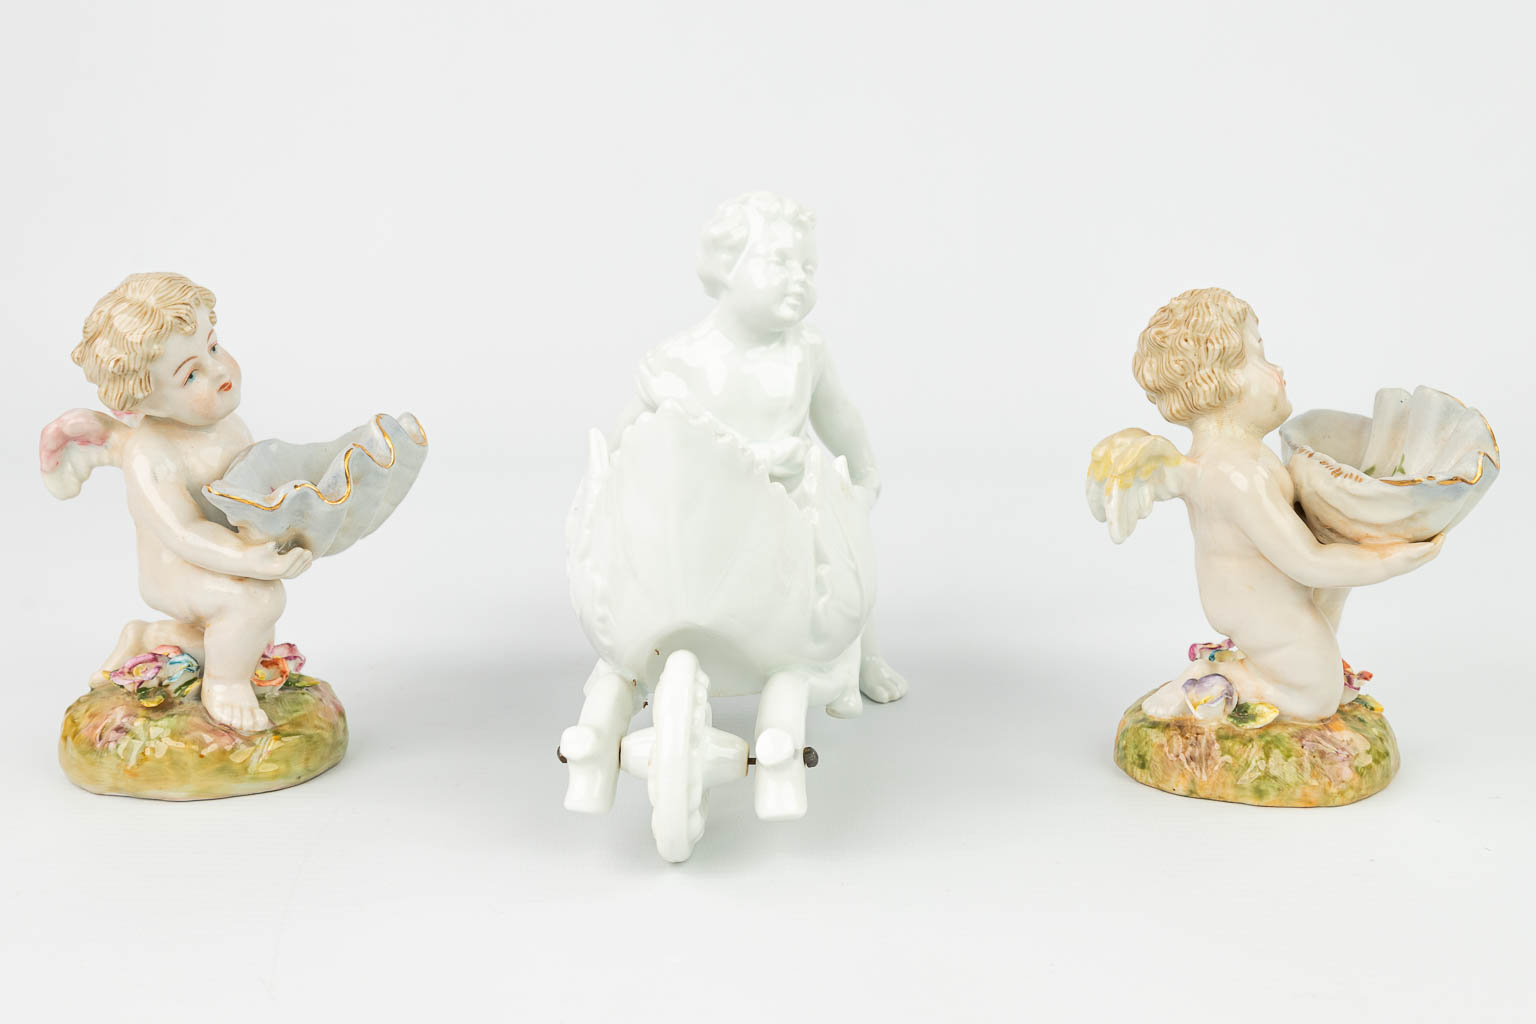 A collection of 5 figurines of putti. Made of porcelain by different factories. (H:14cm)